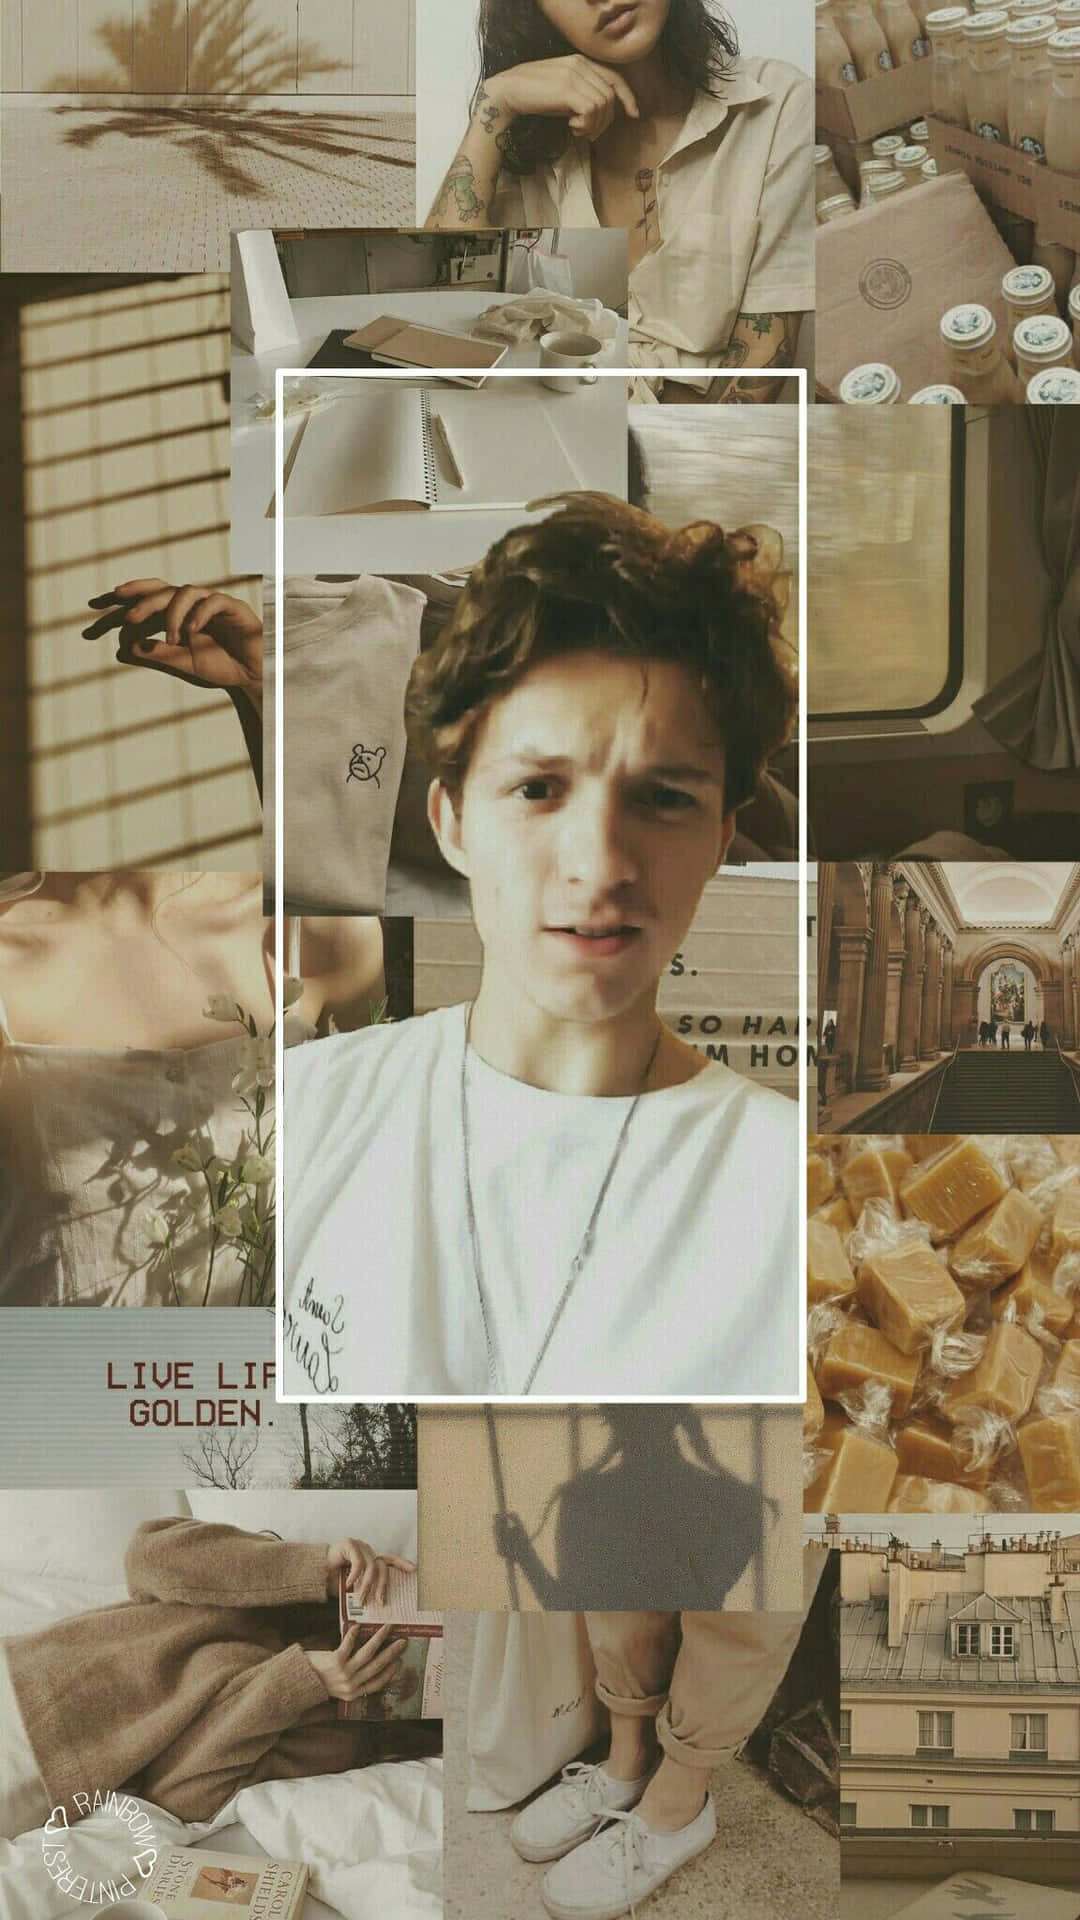 Tom Holland aesthetic wallpaper I made! Credit to the rightful owners of the pictures - Tom Holland